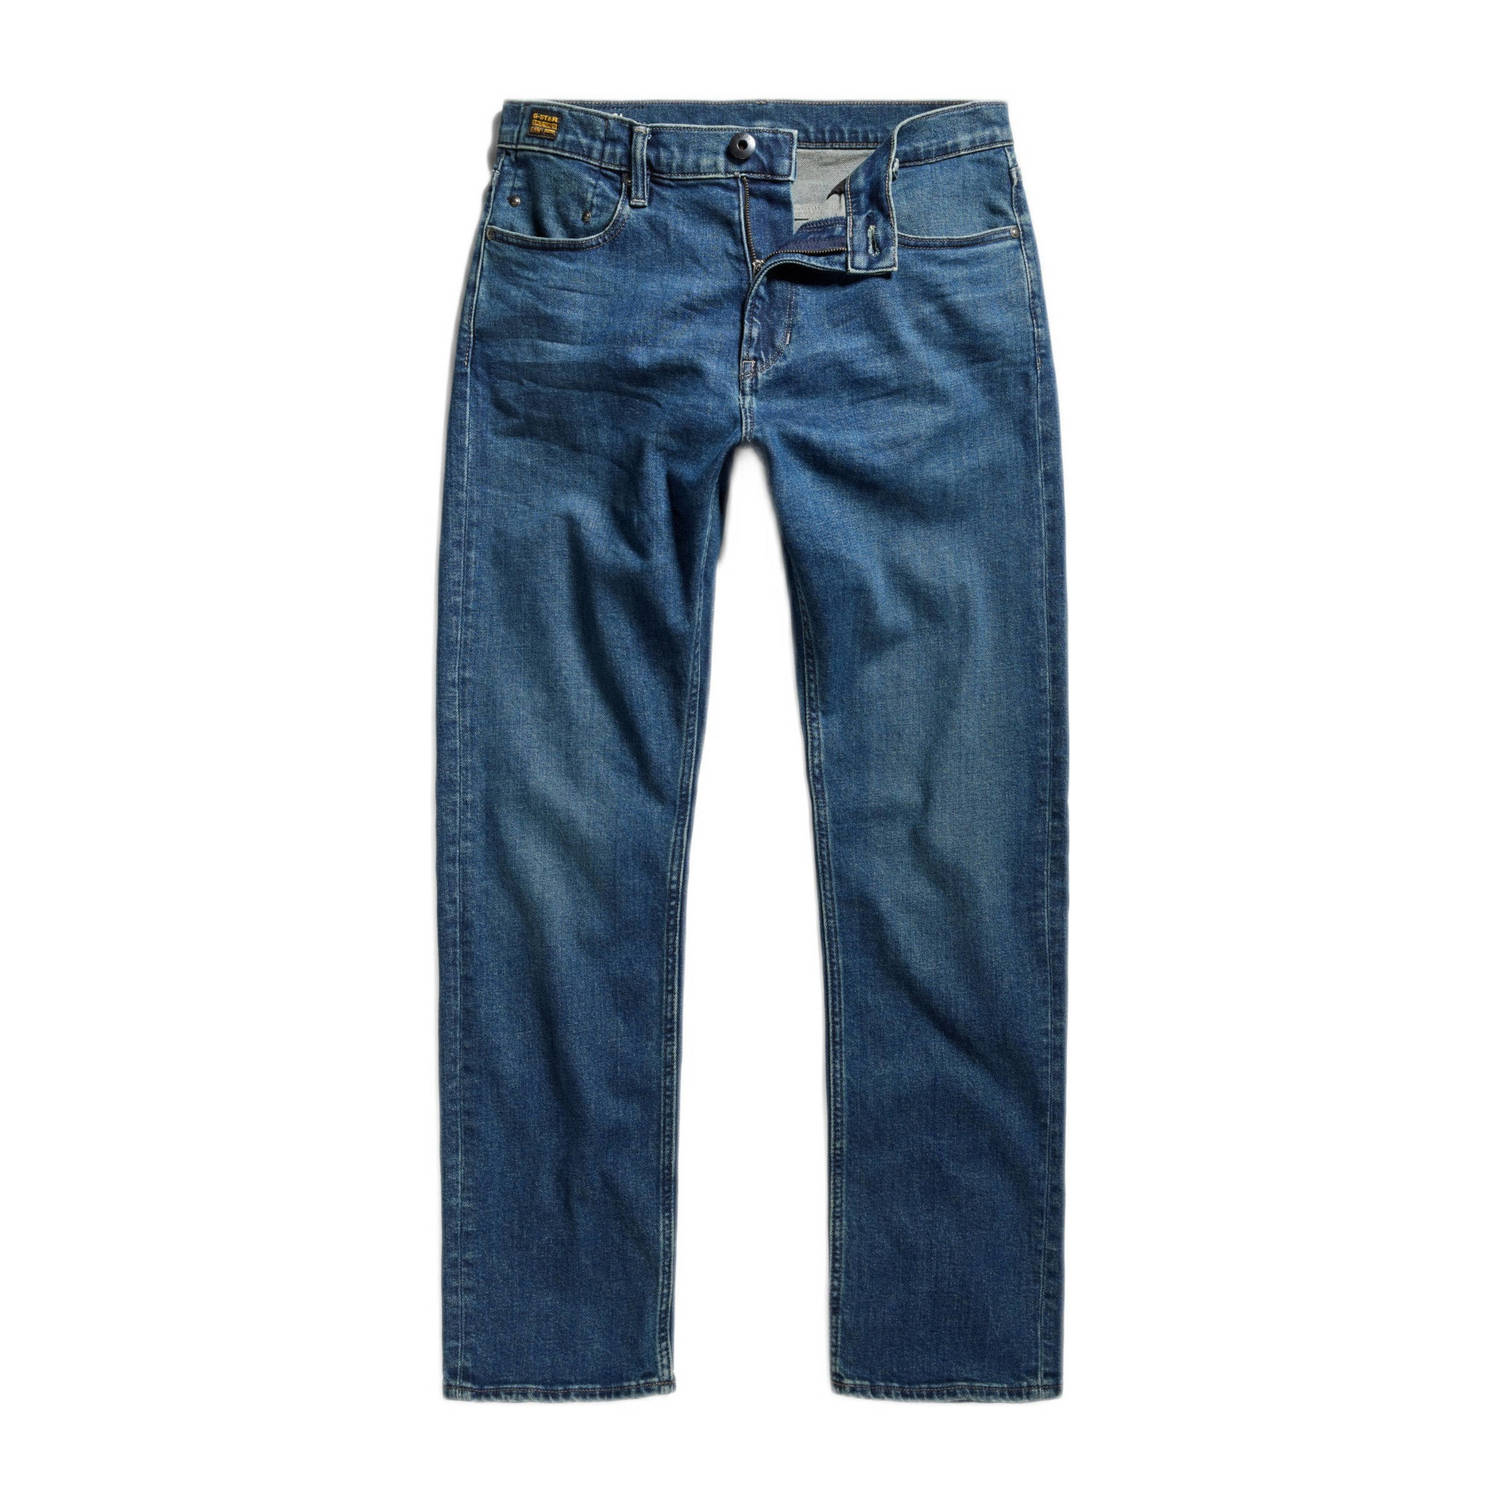 G-Star RAW Mosa Straight fit jeans worn in blue canal